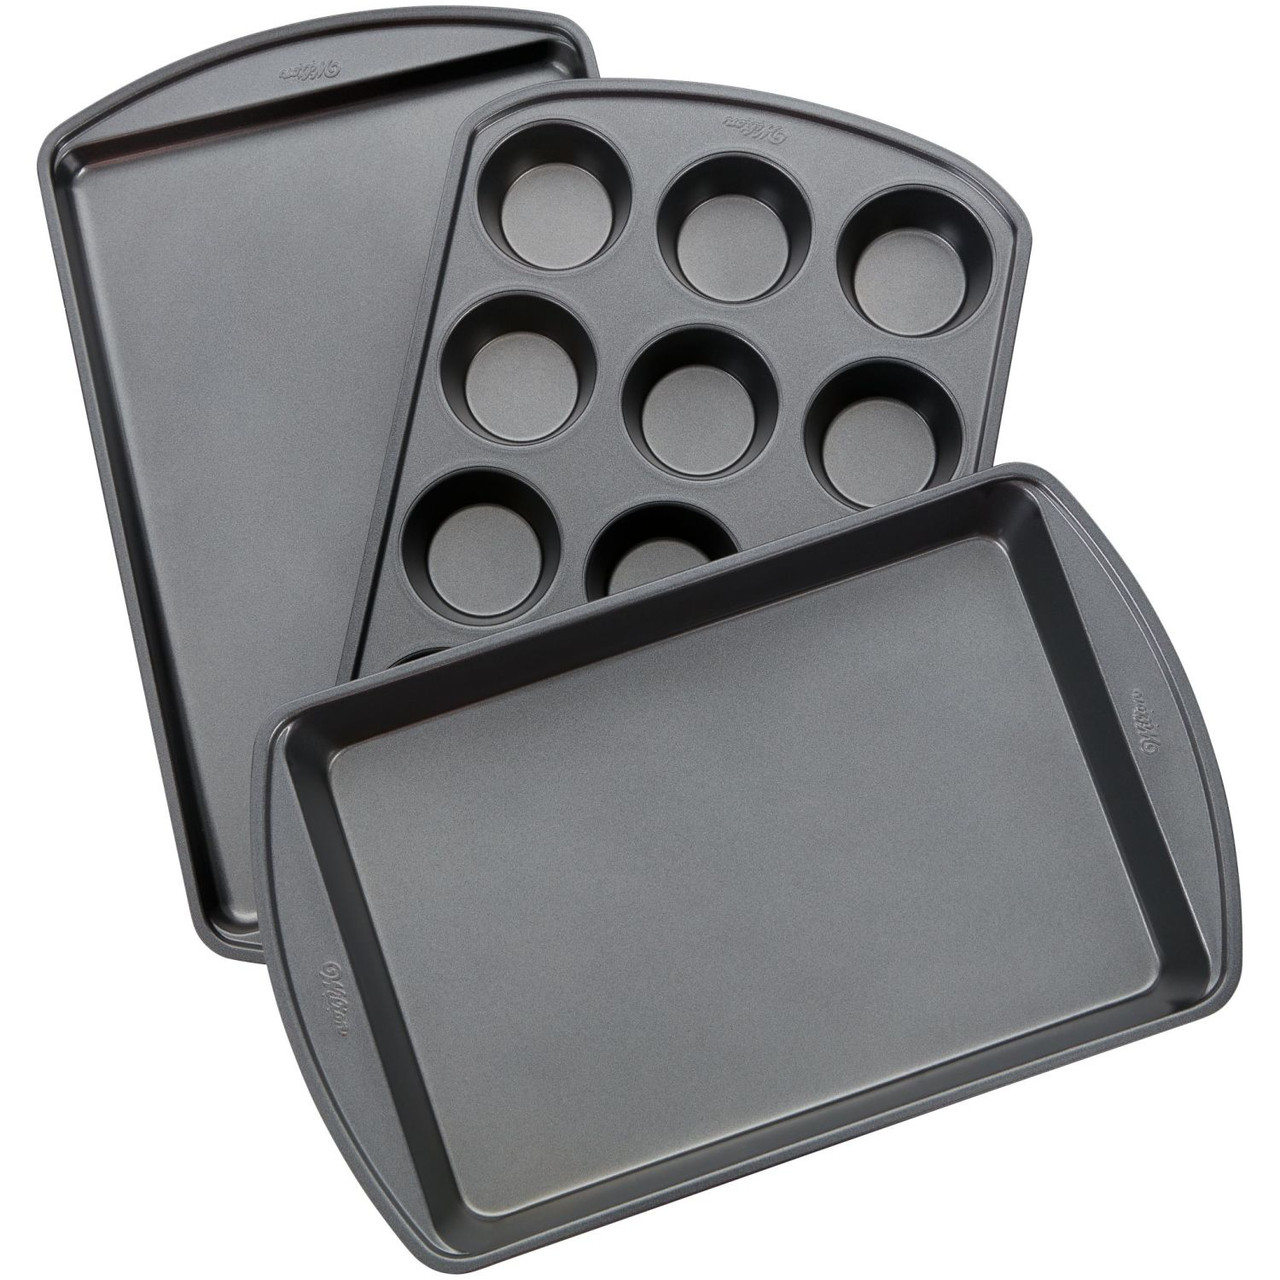 Wilton Perfect Results Muffin, Baking and Oblong Pan Bakeware Set, 3-Piece | Non-Stick